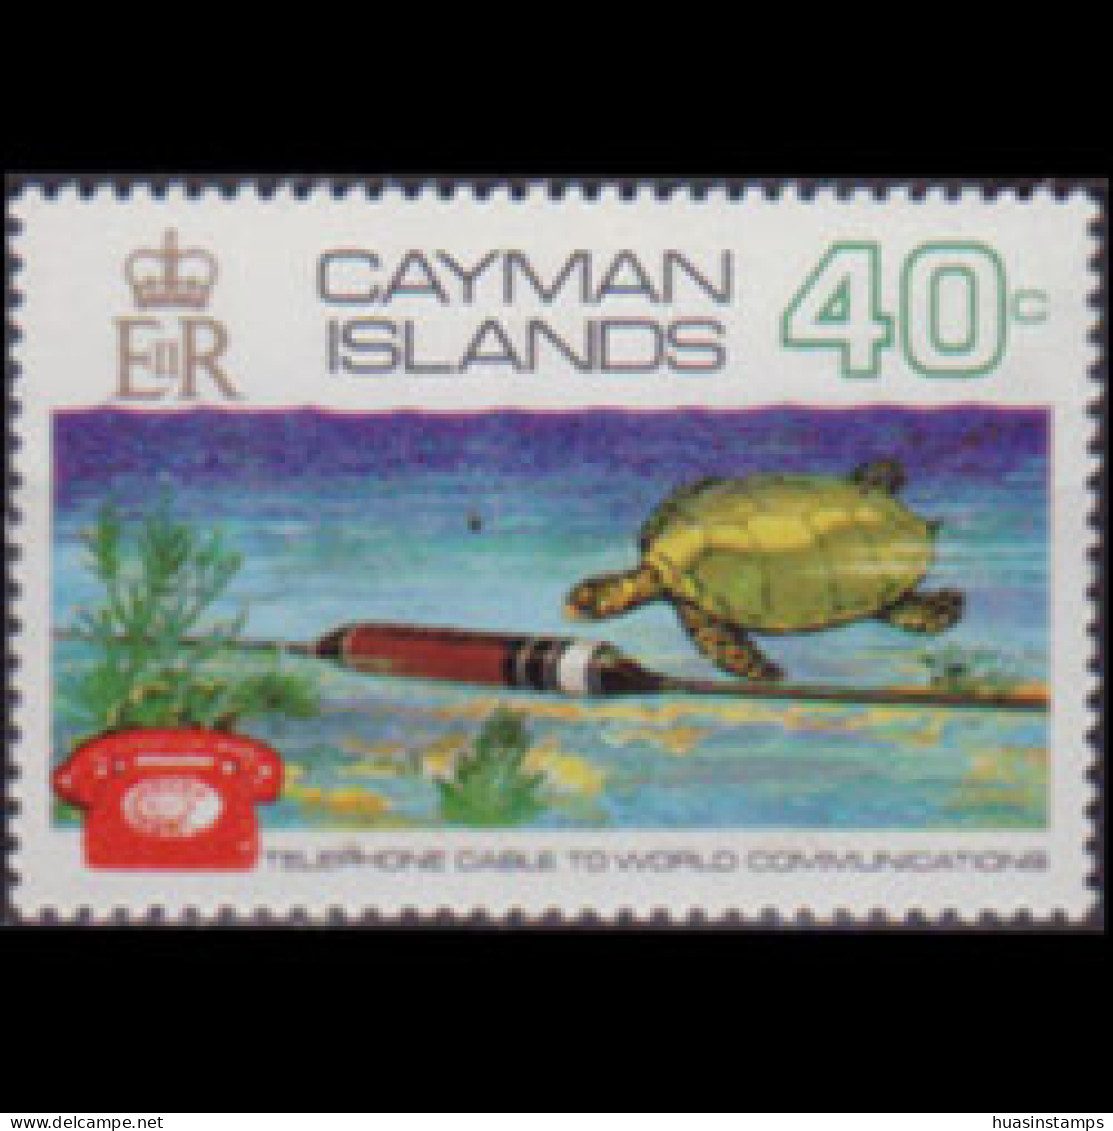 CAYMAN IS. 1972 - Scott# 299 Underwater Cable 40c MNH - Caimán (Islas)